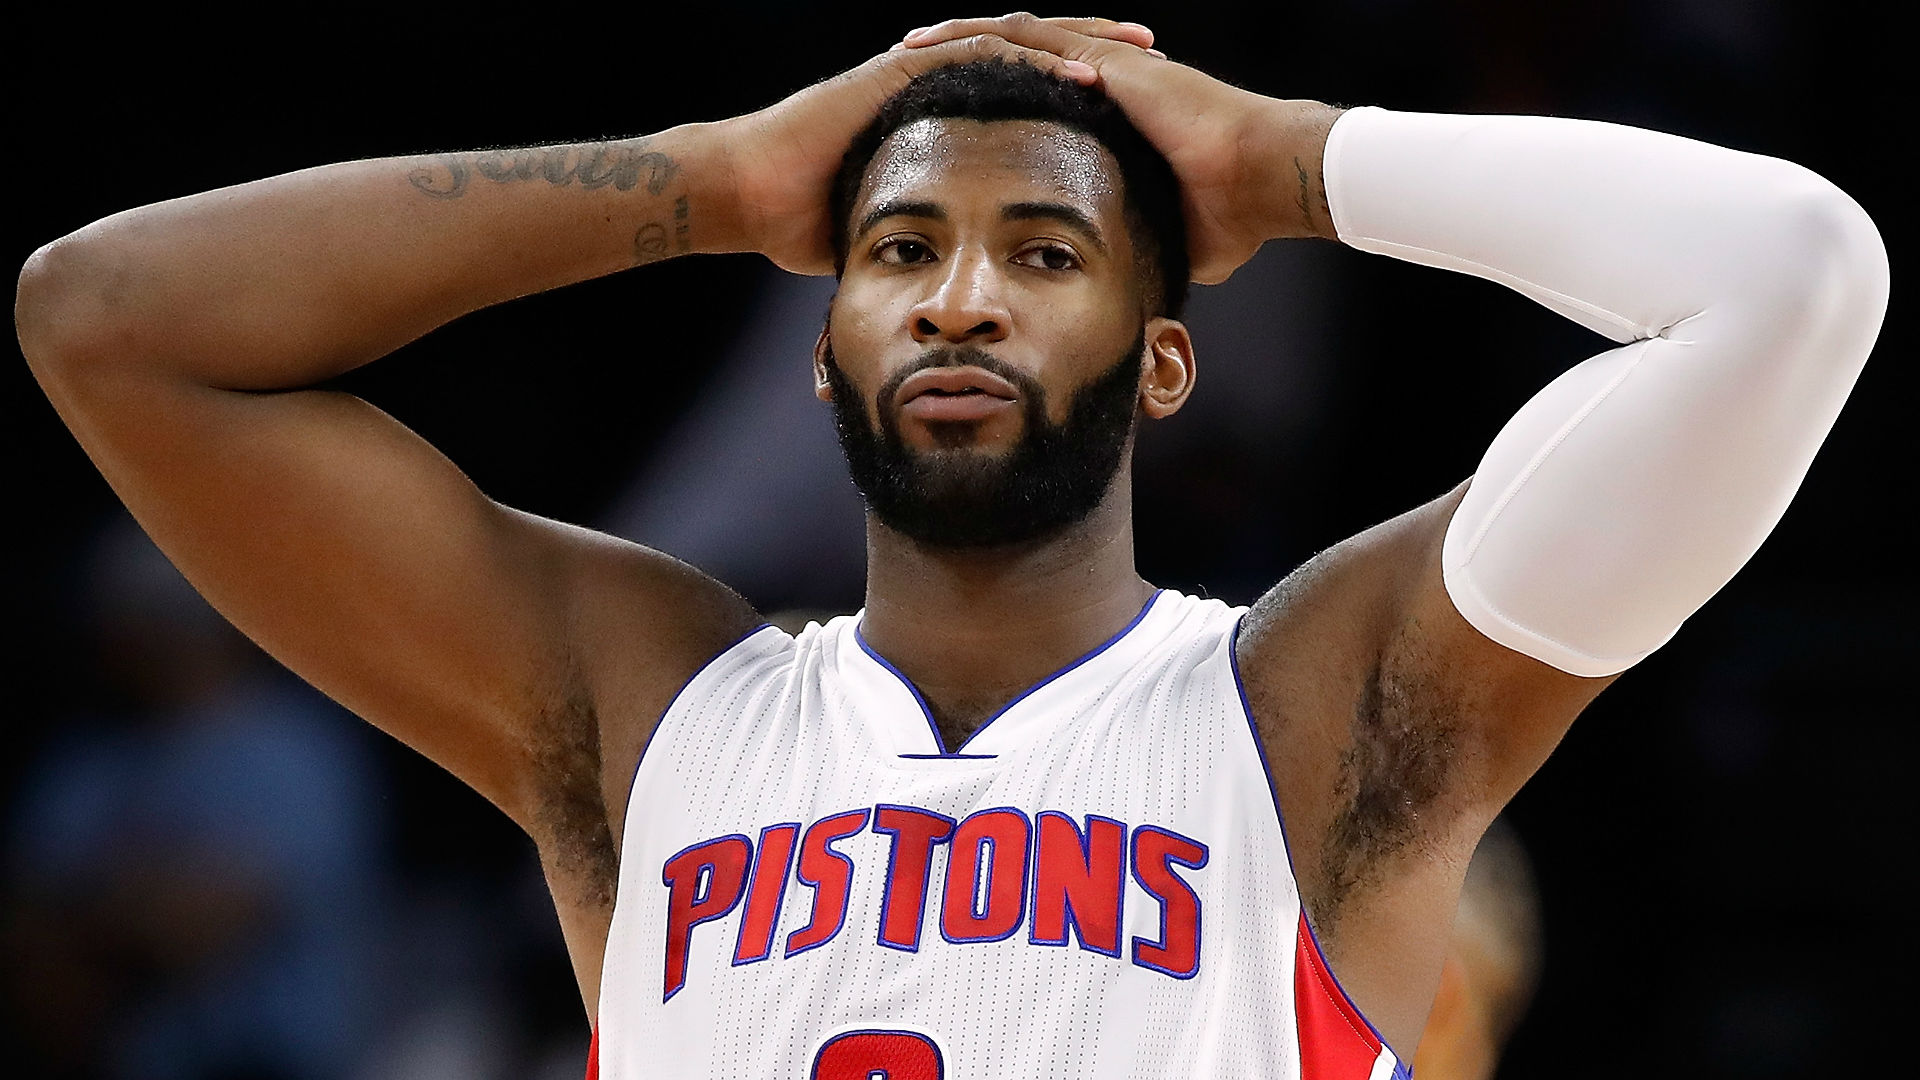 Pistons' Andre Drummond undergoes surgery to repair deviated septum | NBA | Sporting News1920 x 1080